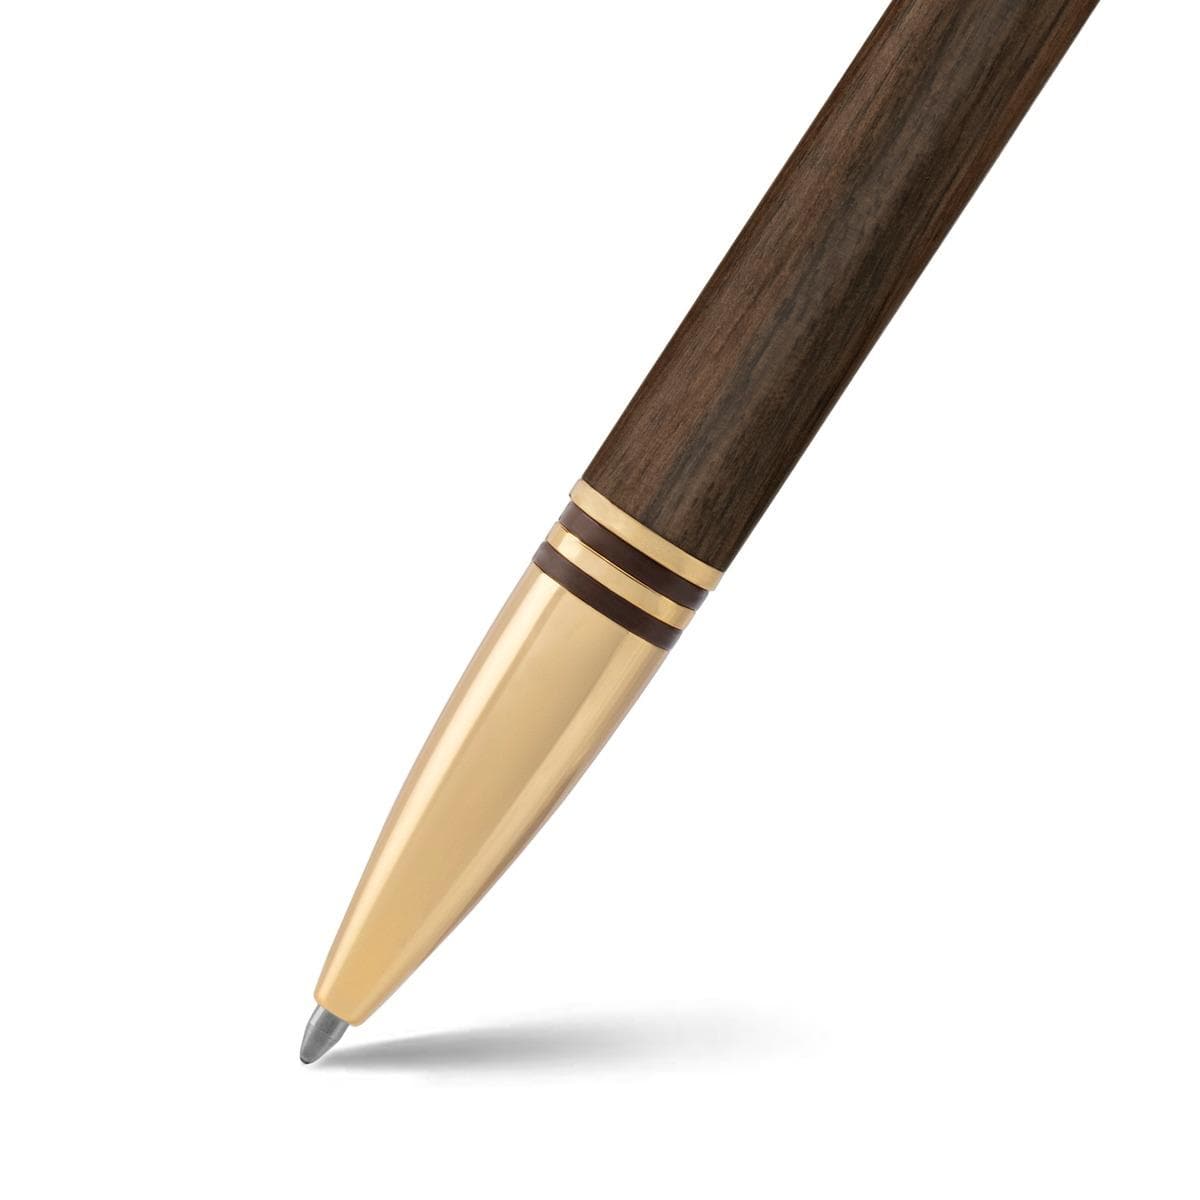 LAPIS BARD Contemporary Torque Hickory Ballpoint Pen - Brown with Gold Trims WP33015 - Kamal Watch Company